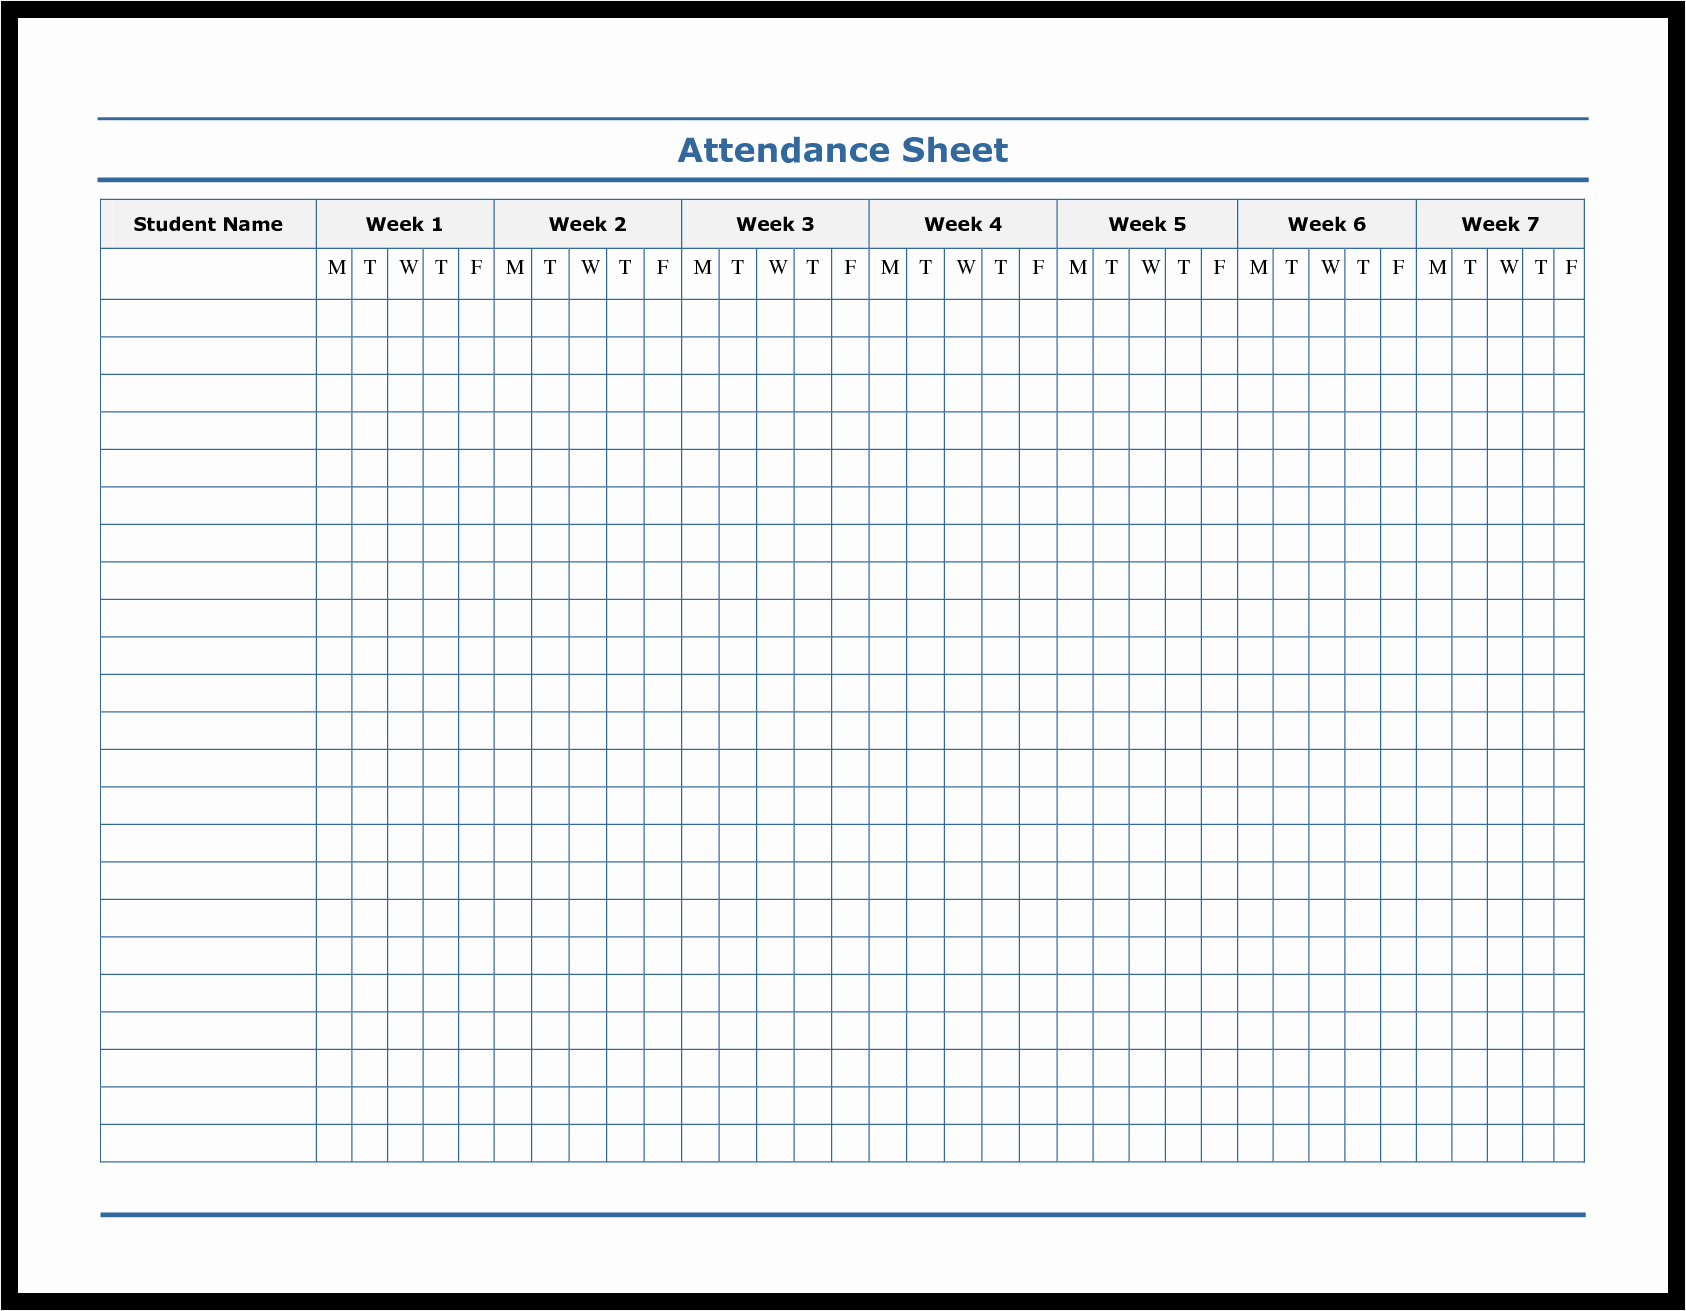 Employee attendance Records Template Awesome Blank Employee attendance Record Template Sample